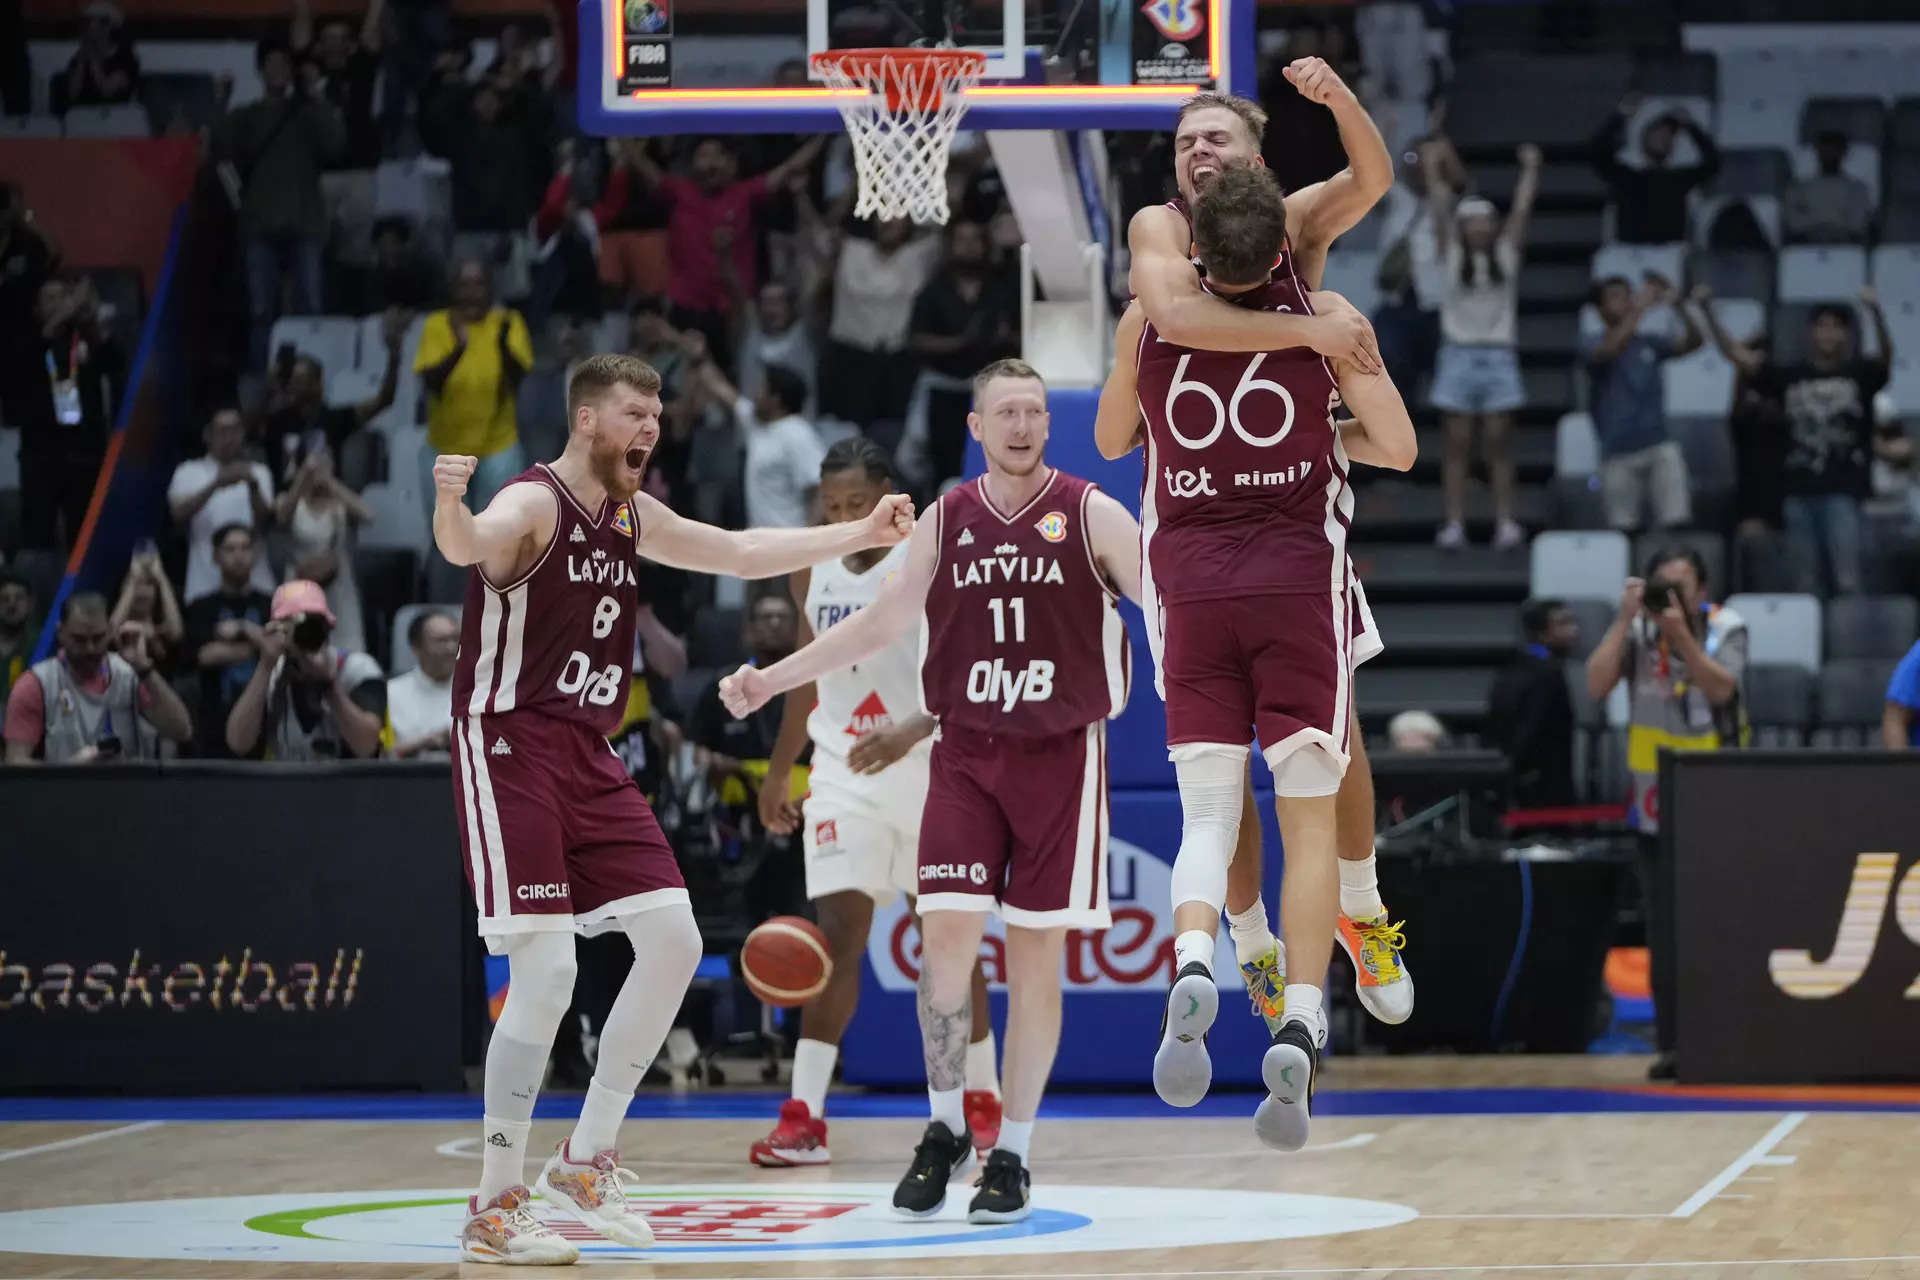 fiba world cup 2023 Basketball World Cup 2023 When is the U.S team playing, streaming options, live TV, favorites; all you need to know